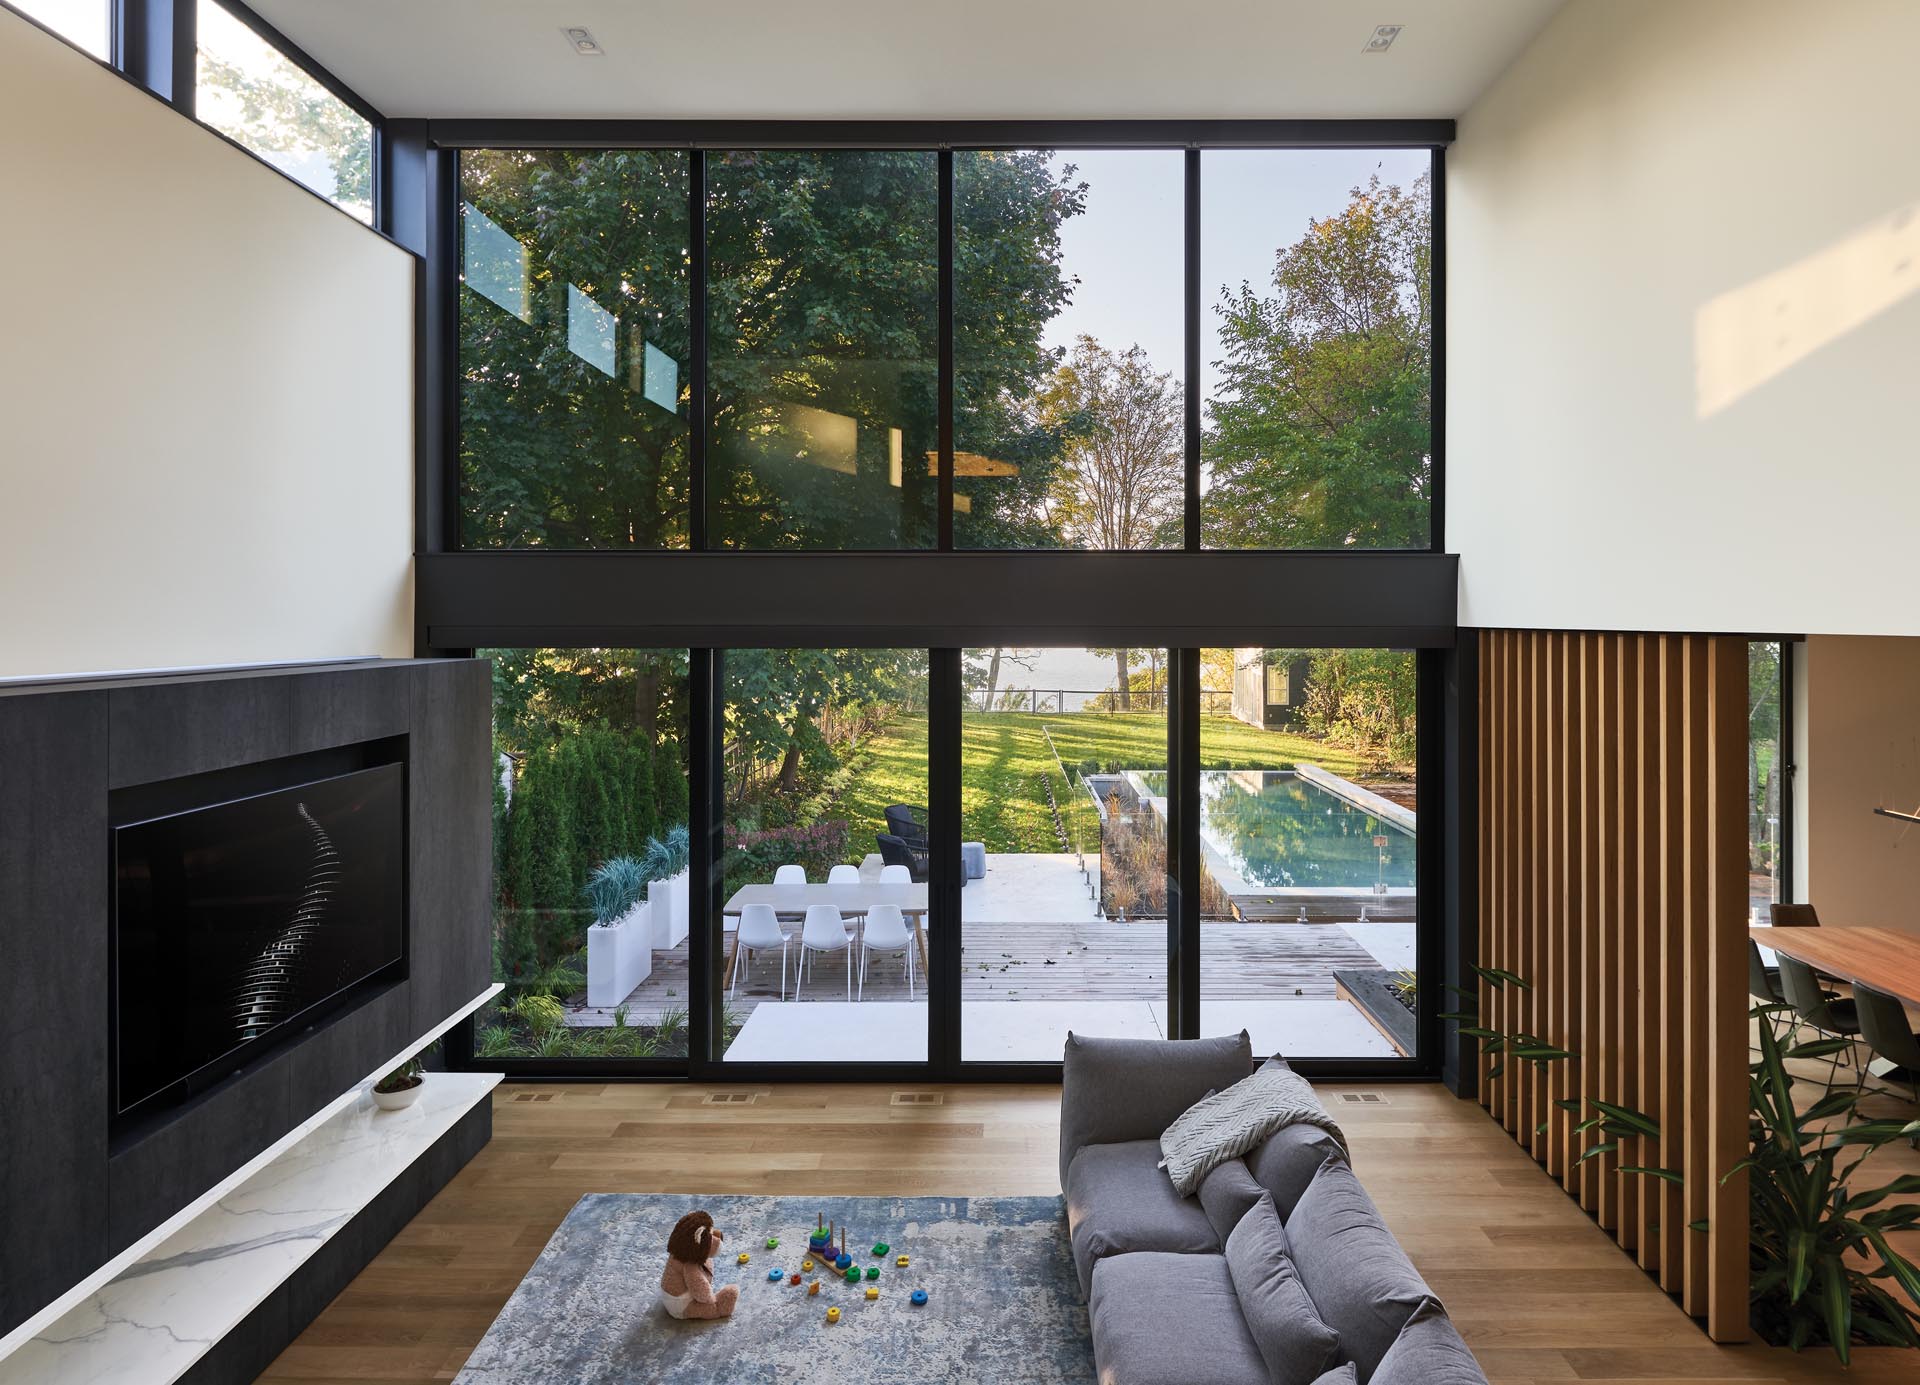 The interior of this modern house includes a double-height great room that has a wall of windows that look out to the swimming pool, yard, and lake views.